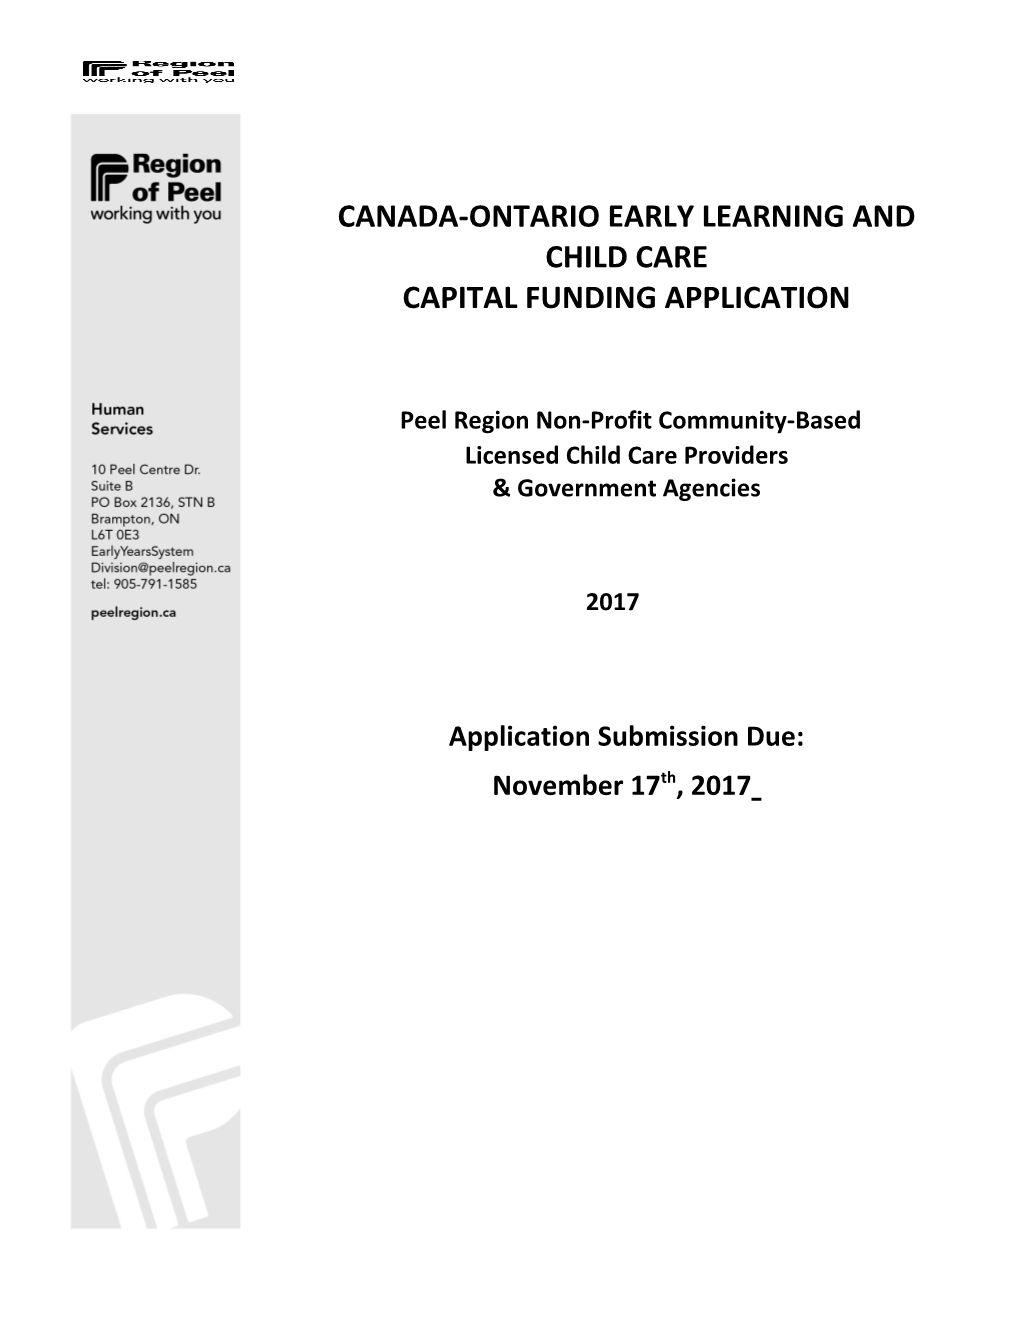 Canada-Ontario Early Learning and Child Care Capital Funding Application